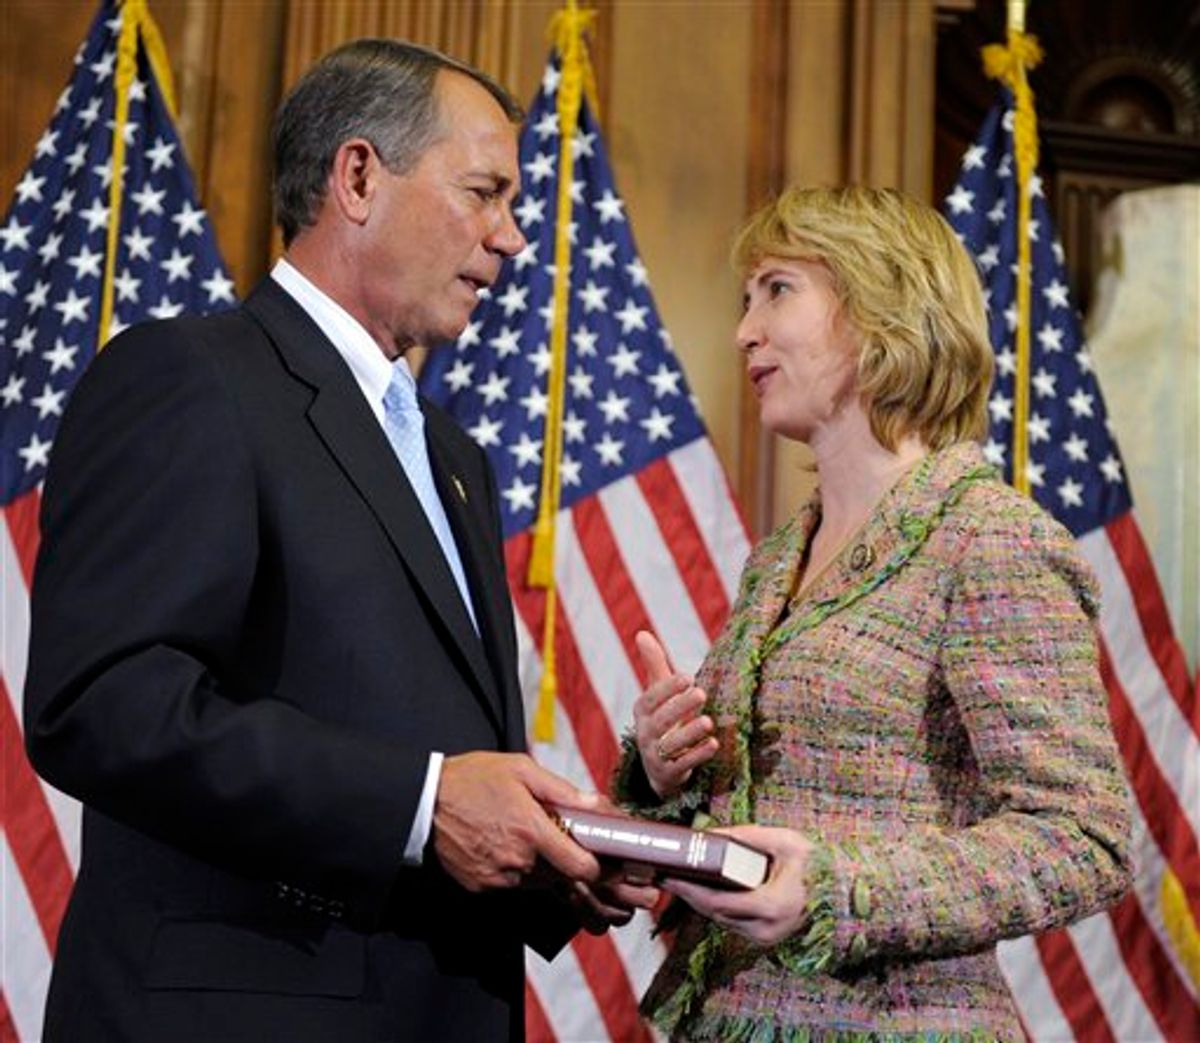 FILE - In a Jan. 5, 2011 file photo, House Speaker John Boehner of Ohio reenacts the swearing in of Rep. Gabrielle Giffords, D-Ariz., on Capitol Hill in Washington. She loves motorcycles and yoga, and is as comfortable in a business suit walking the halls of Congress as she is clad in leather riding gear at the famed Sturgis Motorcycle Rally. She holds a master's degree in urban planning, yet can mount a tire in a flash. Pretty and petite, sometimes soft-spoken, she will take on even her most ardent   adversaries and try talking them down with a firm hand but also a smile. Said one friend of Gabrielle Giffords: "She really pretty much defies a lot of description."  (AP Photo/Susan Walsh, File) (AP)